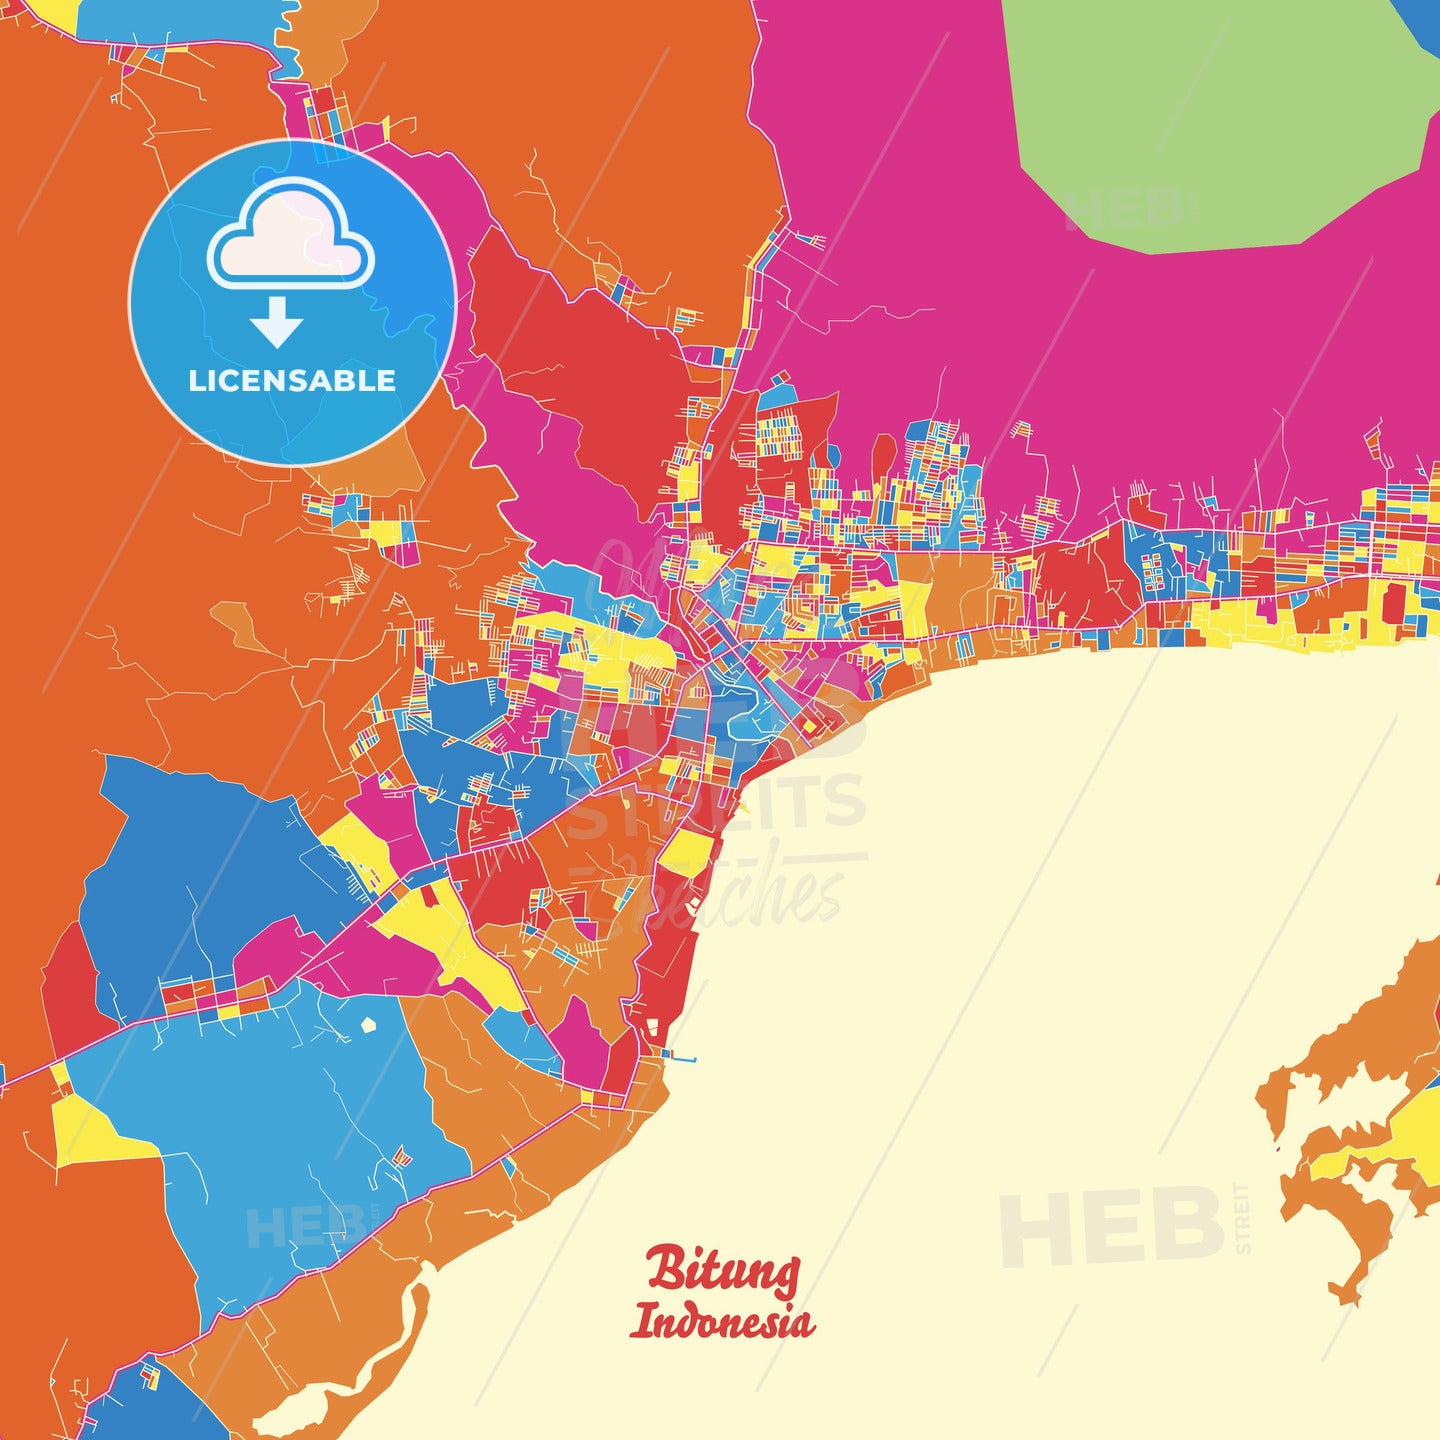 Bitung, Indonesia Crazy Colorful Street Map Poster Template - HEBSTREITS Sketches